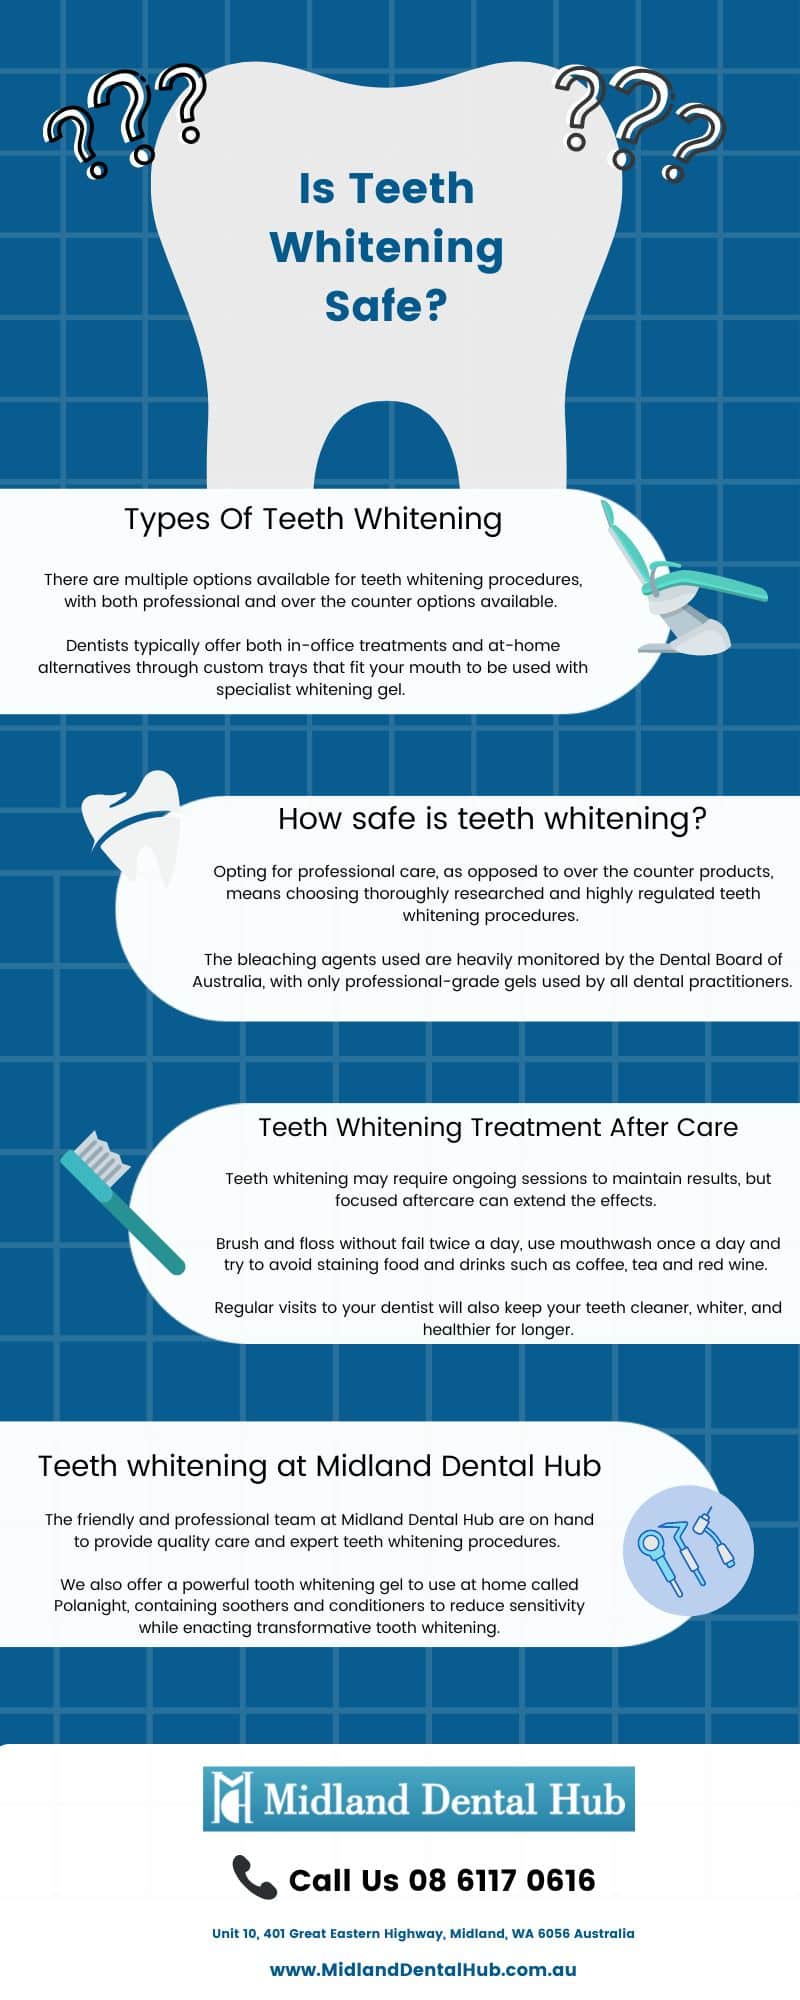 Is Teeth Whitening Safe (Infographic)